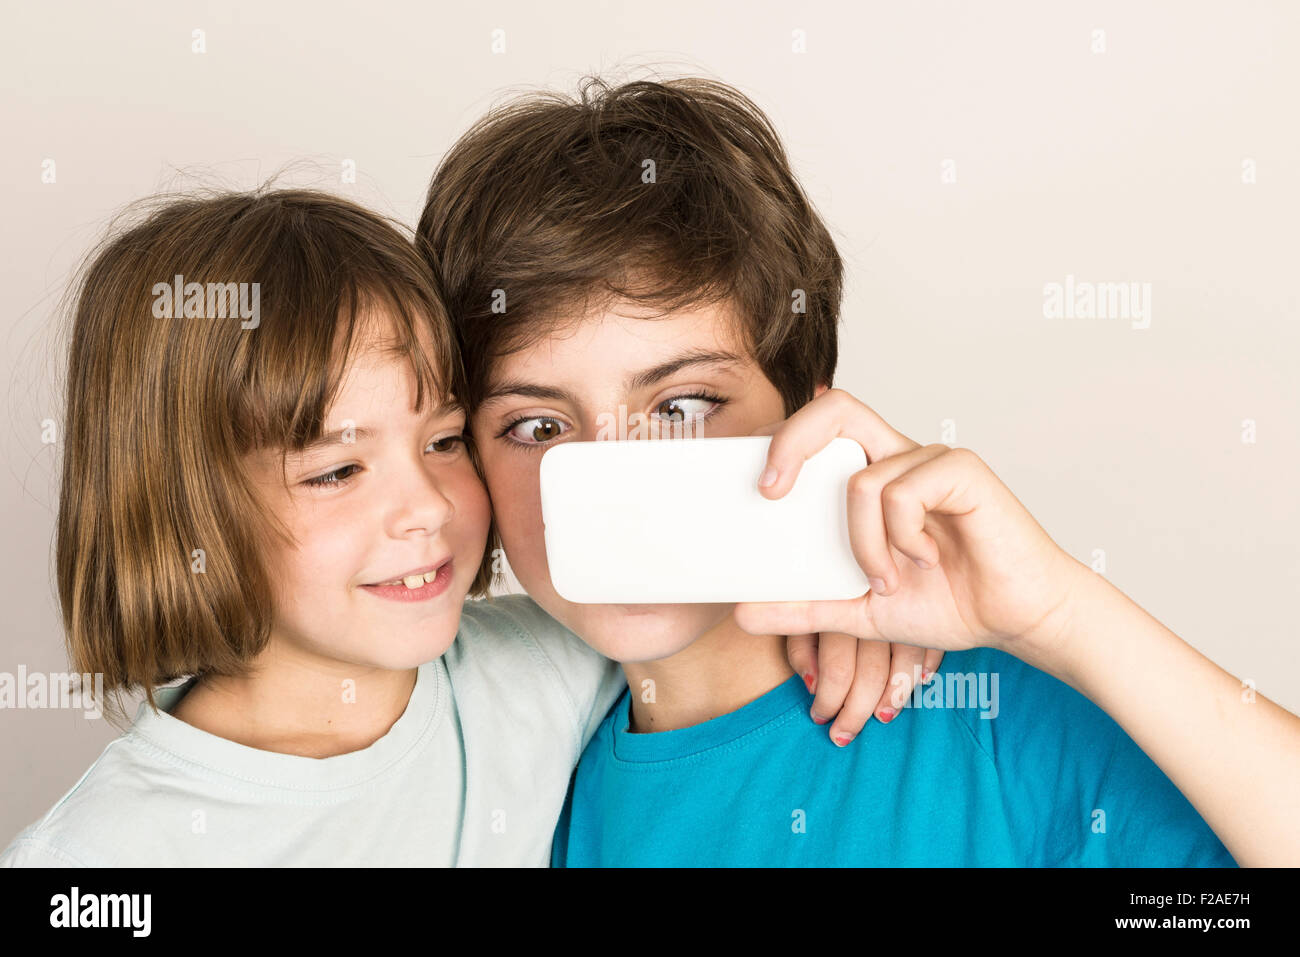 Happy child doing a squint and taking a selfie with a smart phone at home isolated on white background Stock Photo